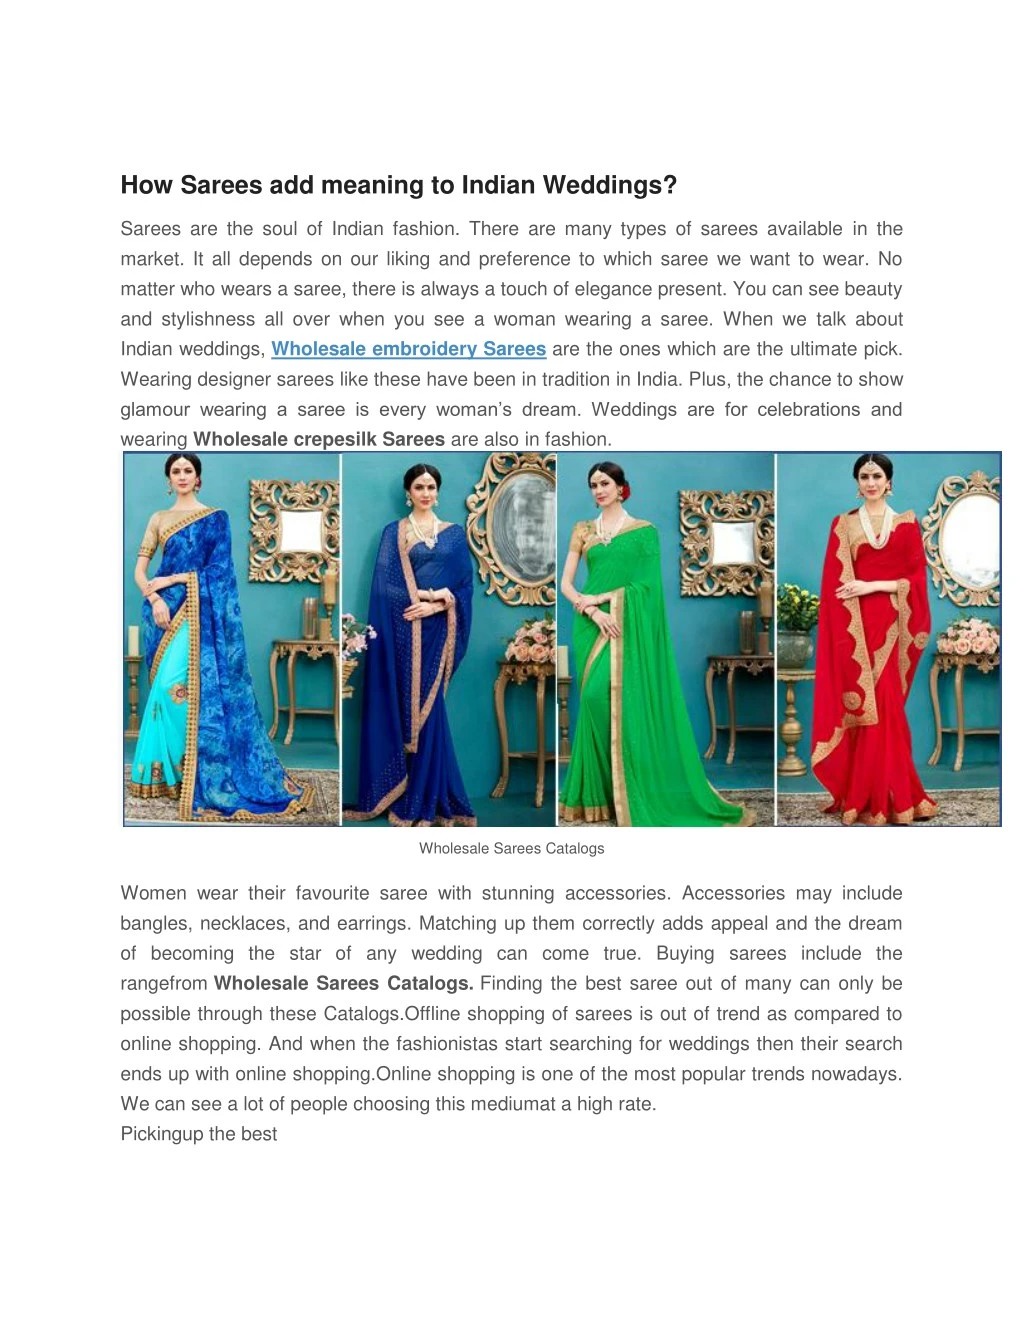 how sarees add meaning to indian weddings